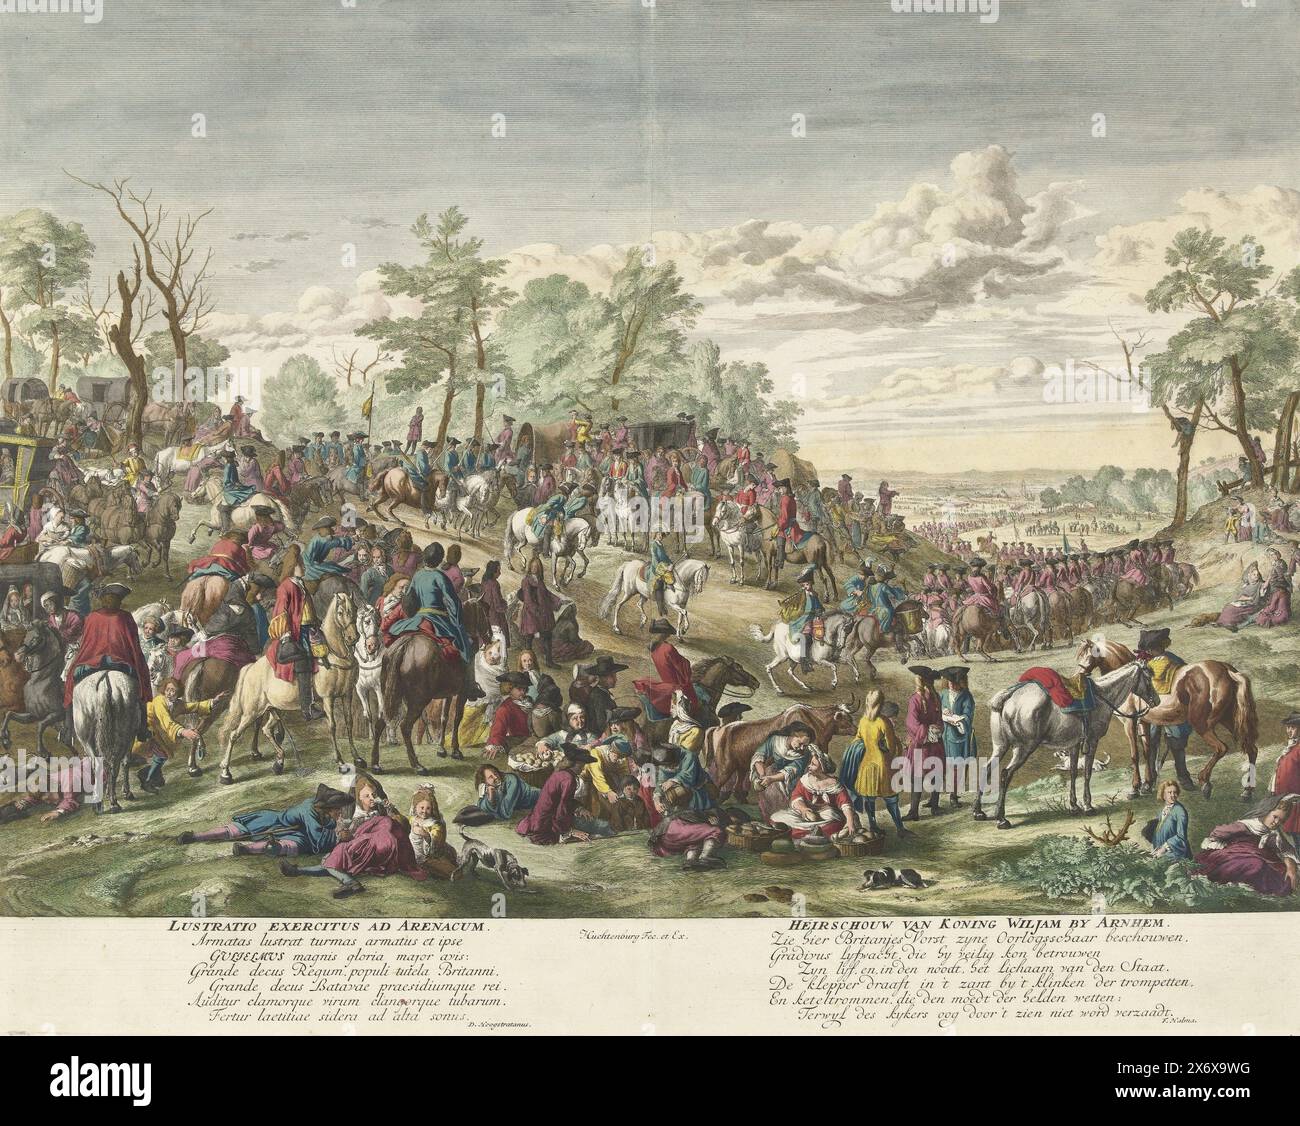 Inspection of the troops by William III at Arnhem, 1691, Lustratio Exercitis ad Arenacum, Heirschouw van Koning Wiljam by Arnhem (title on object), Inspection of the troops by King William III at Arnhem, March 17, 1691. Horsemen parade past the monarch who sits on horseback among his officers. Festive event with families enjoying themselves with food and drinks. On the right a woman relieves herself between bushes. In the caption two verses of six lines in Latin and Dutch., print, print maker: Jan van Huchtenburg, (mentioned on object), publisher: Jan van Huchtenburg, (mentioned on object Stock Photo